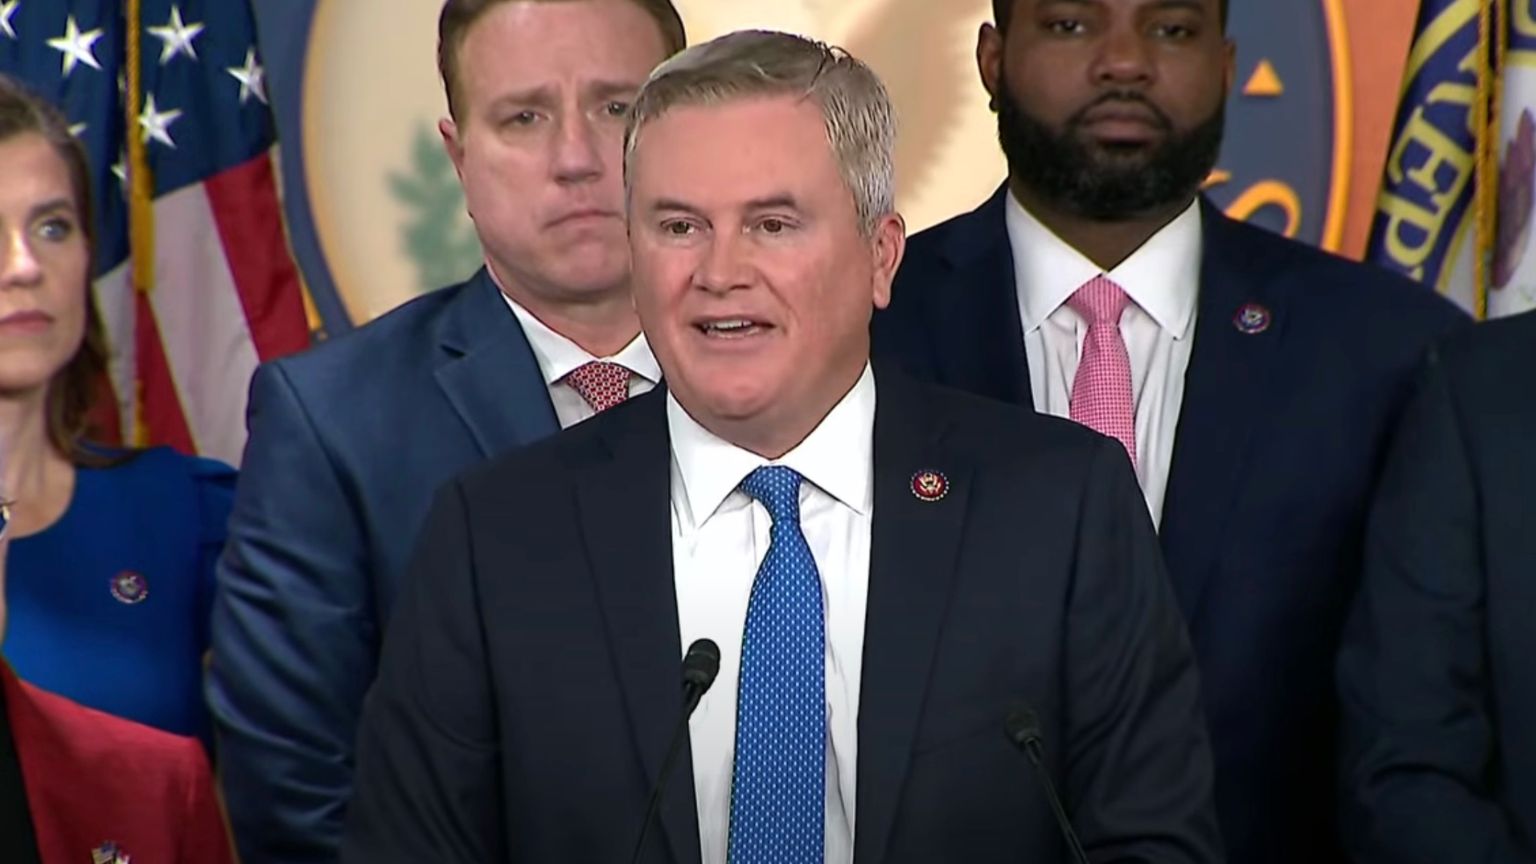 After Twitter revelations, Rep. James Comer says Google and Facebook needs to be investigated for similar censorship collusion